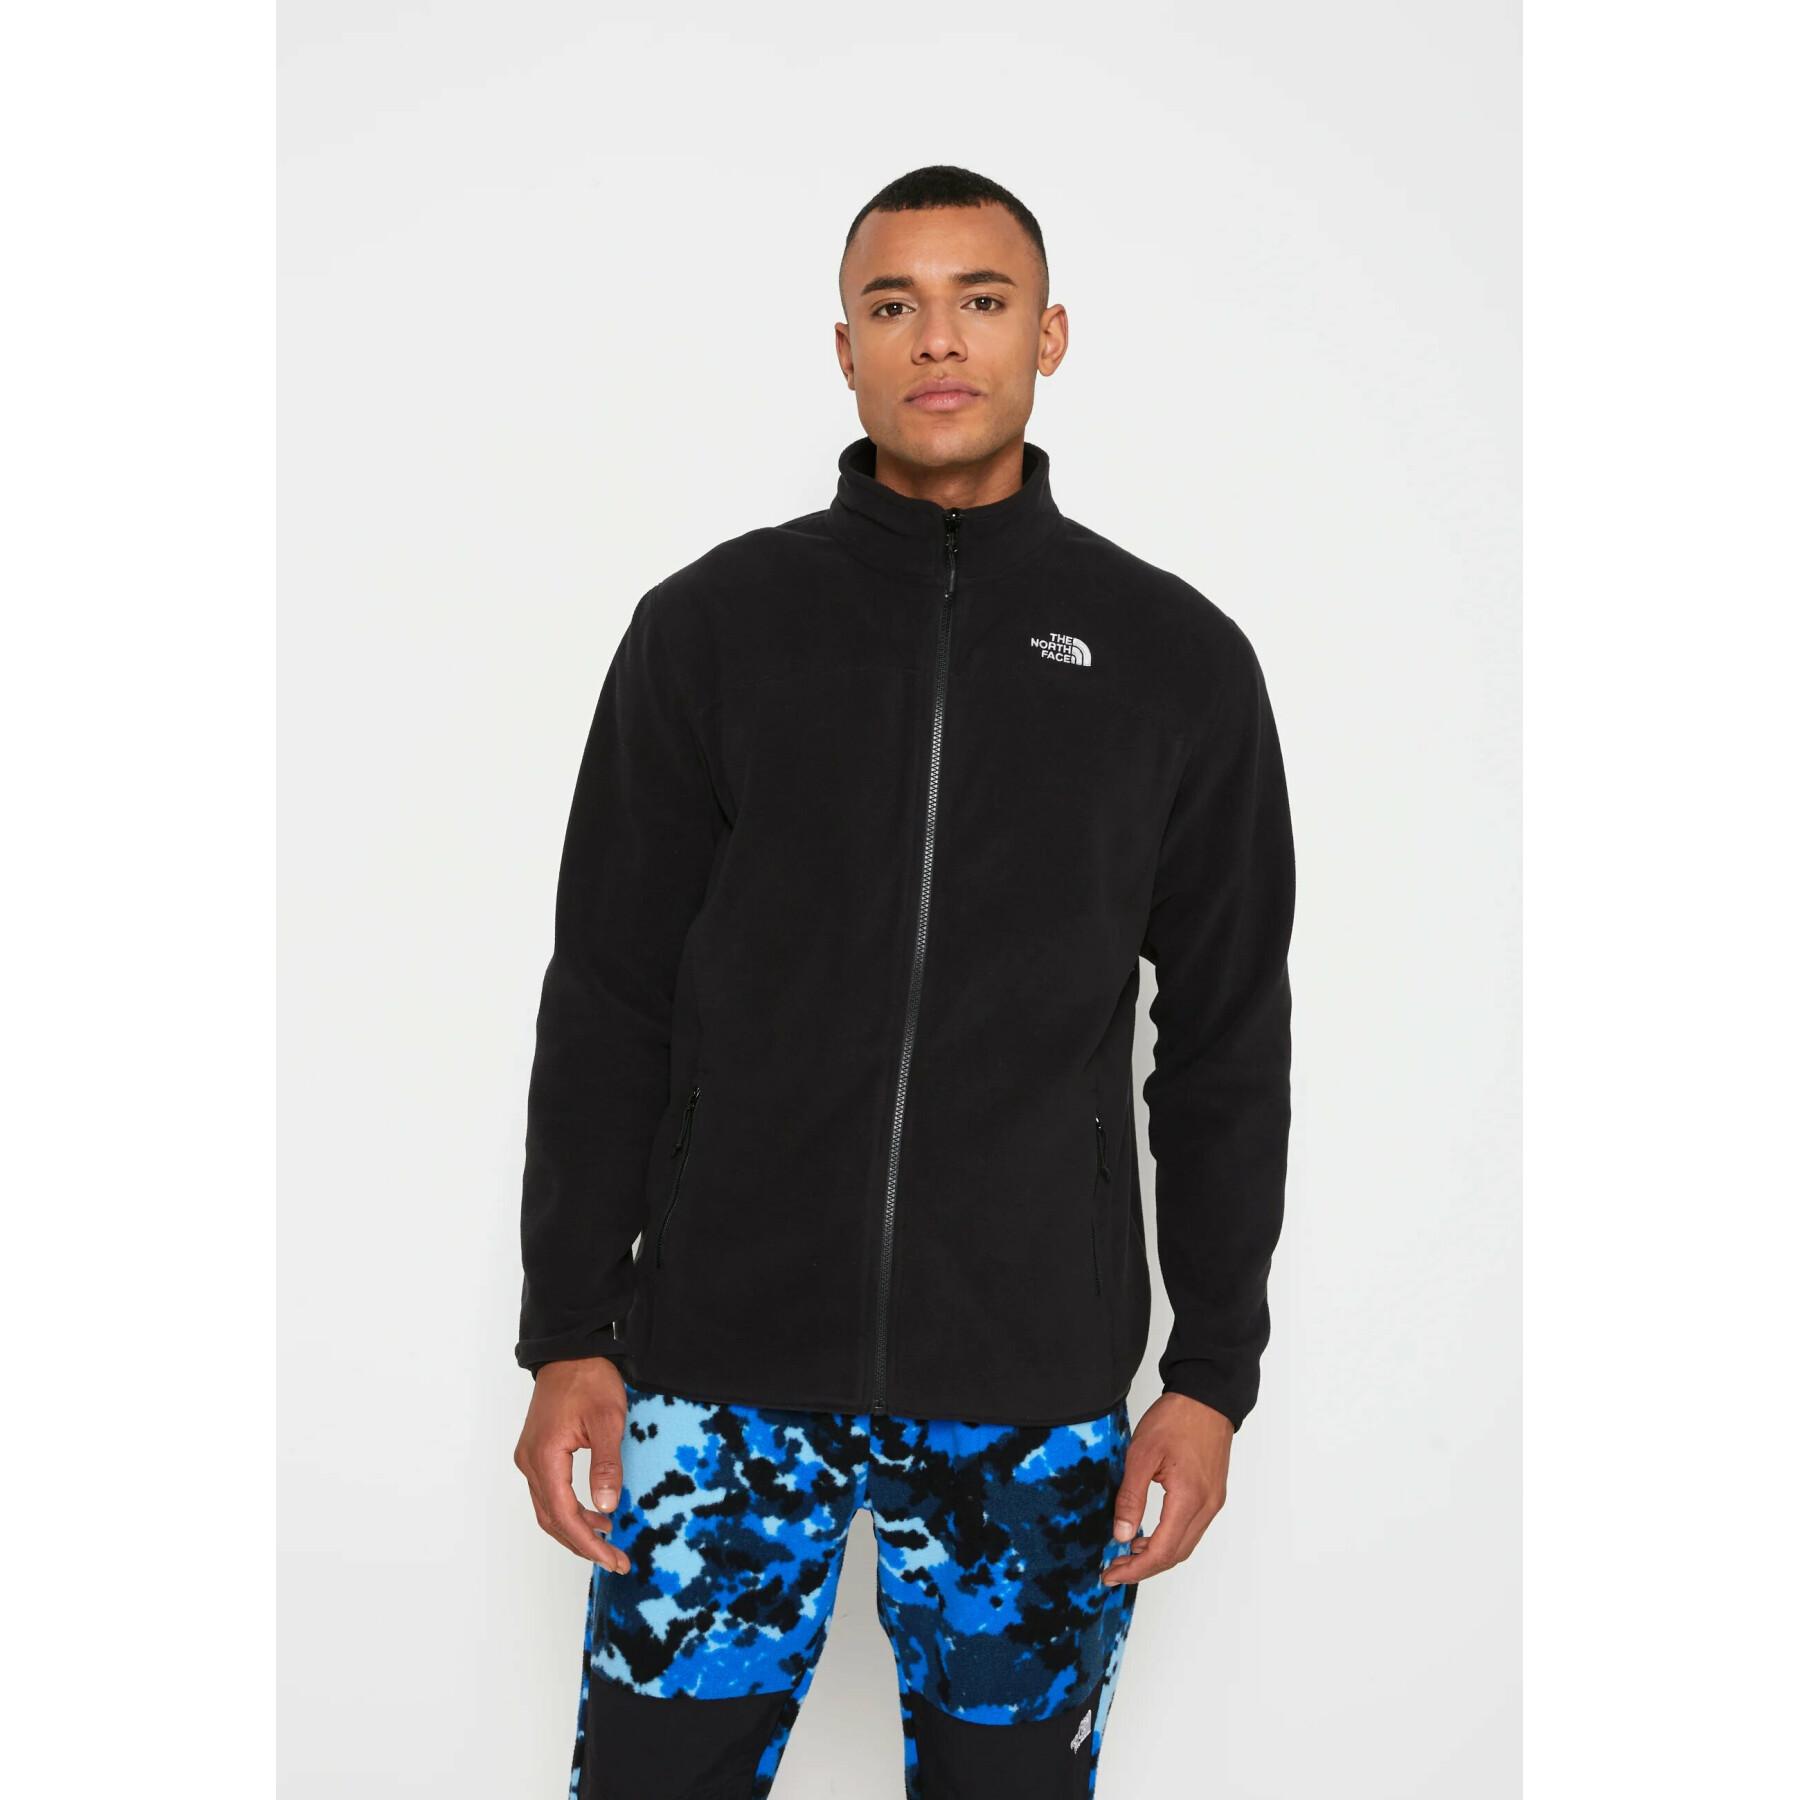 Casaco zip The North Face Campshire Full Zip